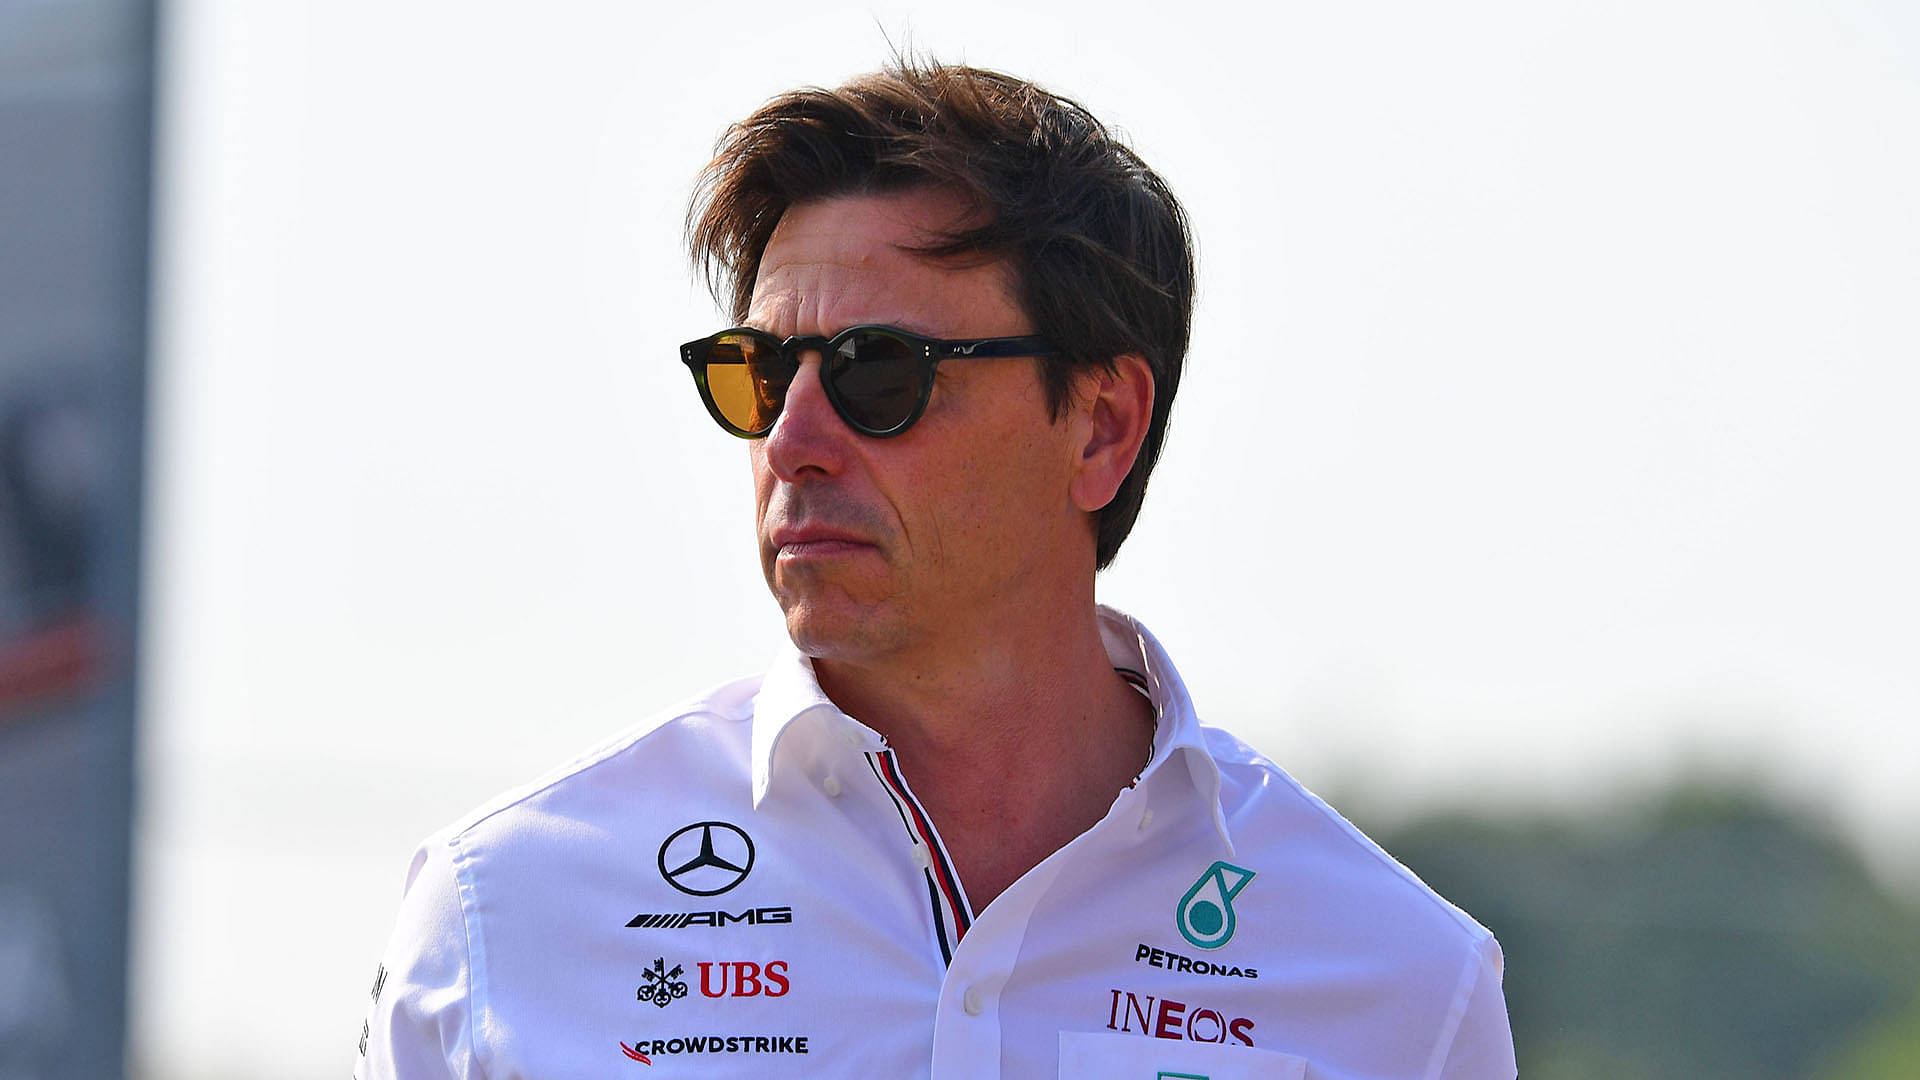 "An easy way out of Mercedes issues" - Toto Wolff says Silver Arrows have a simpler way to escape their predicament